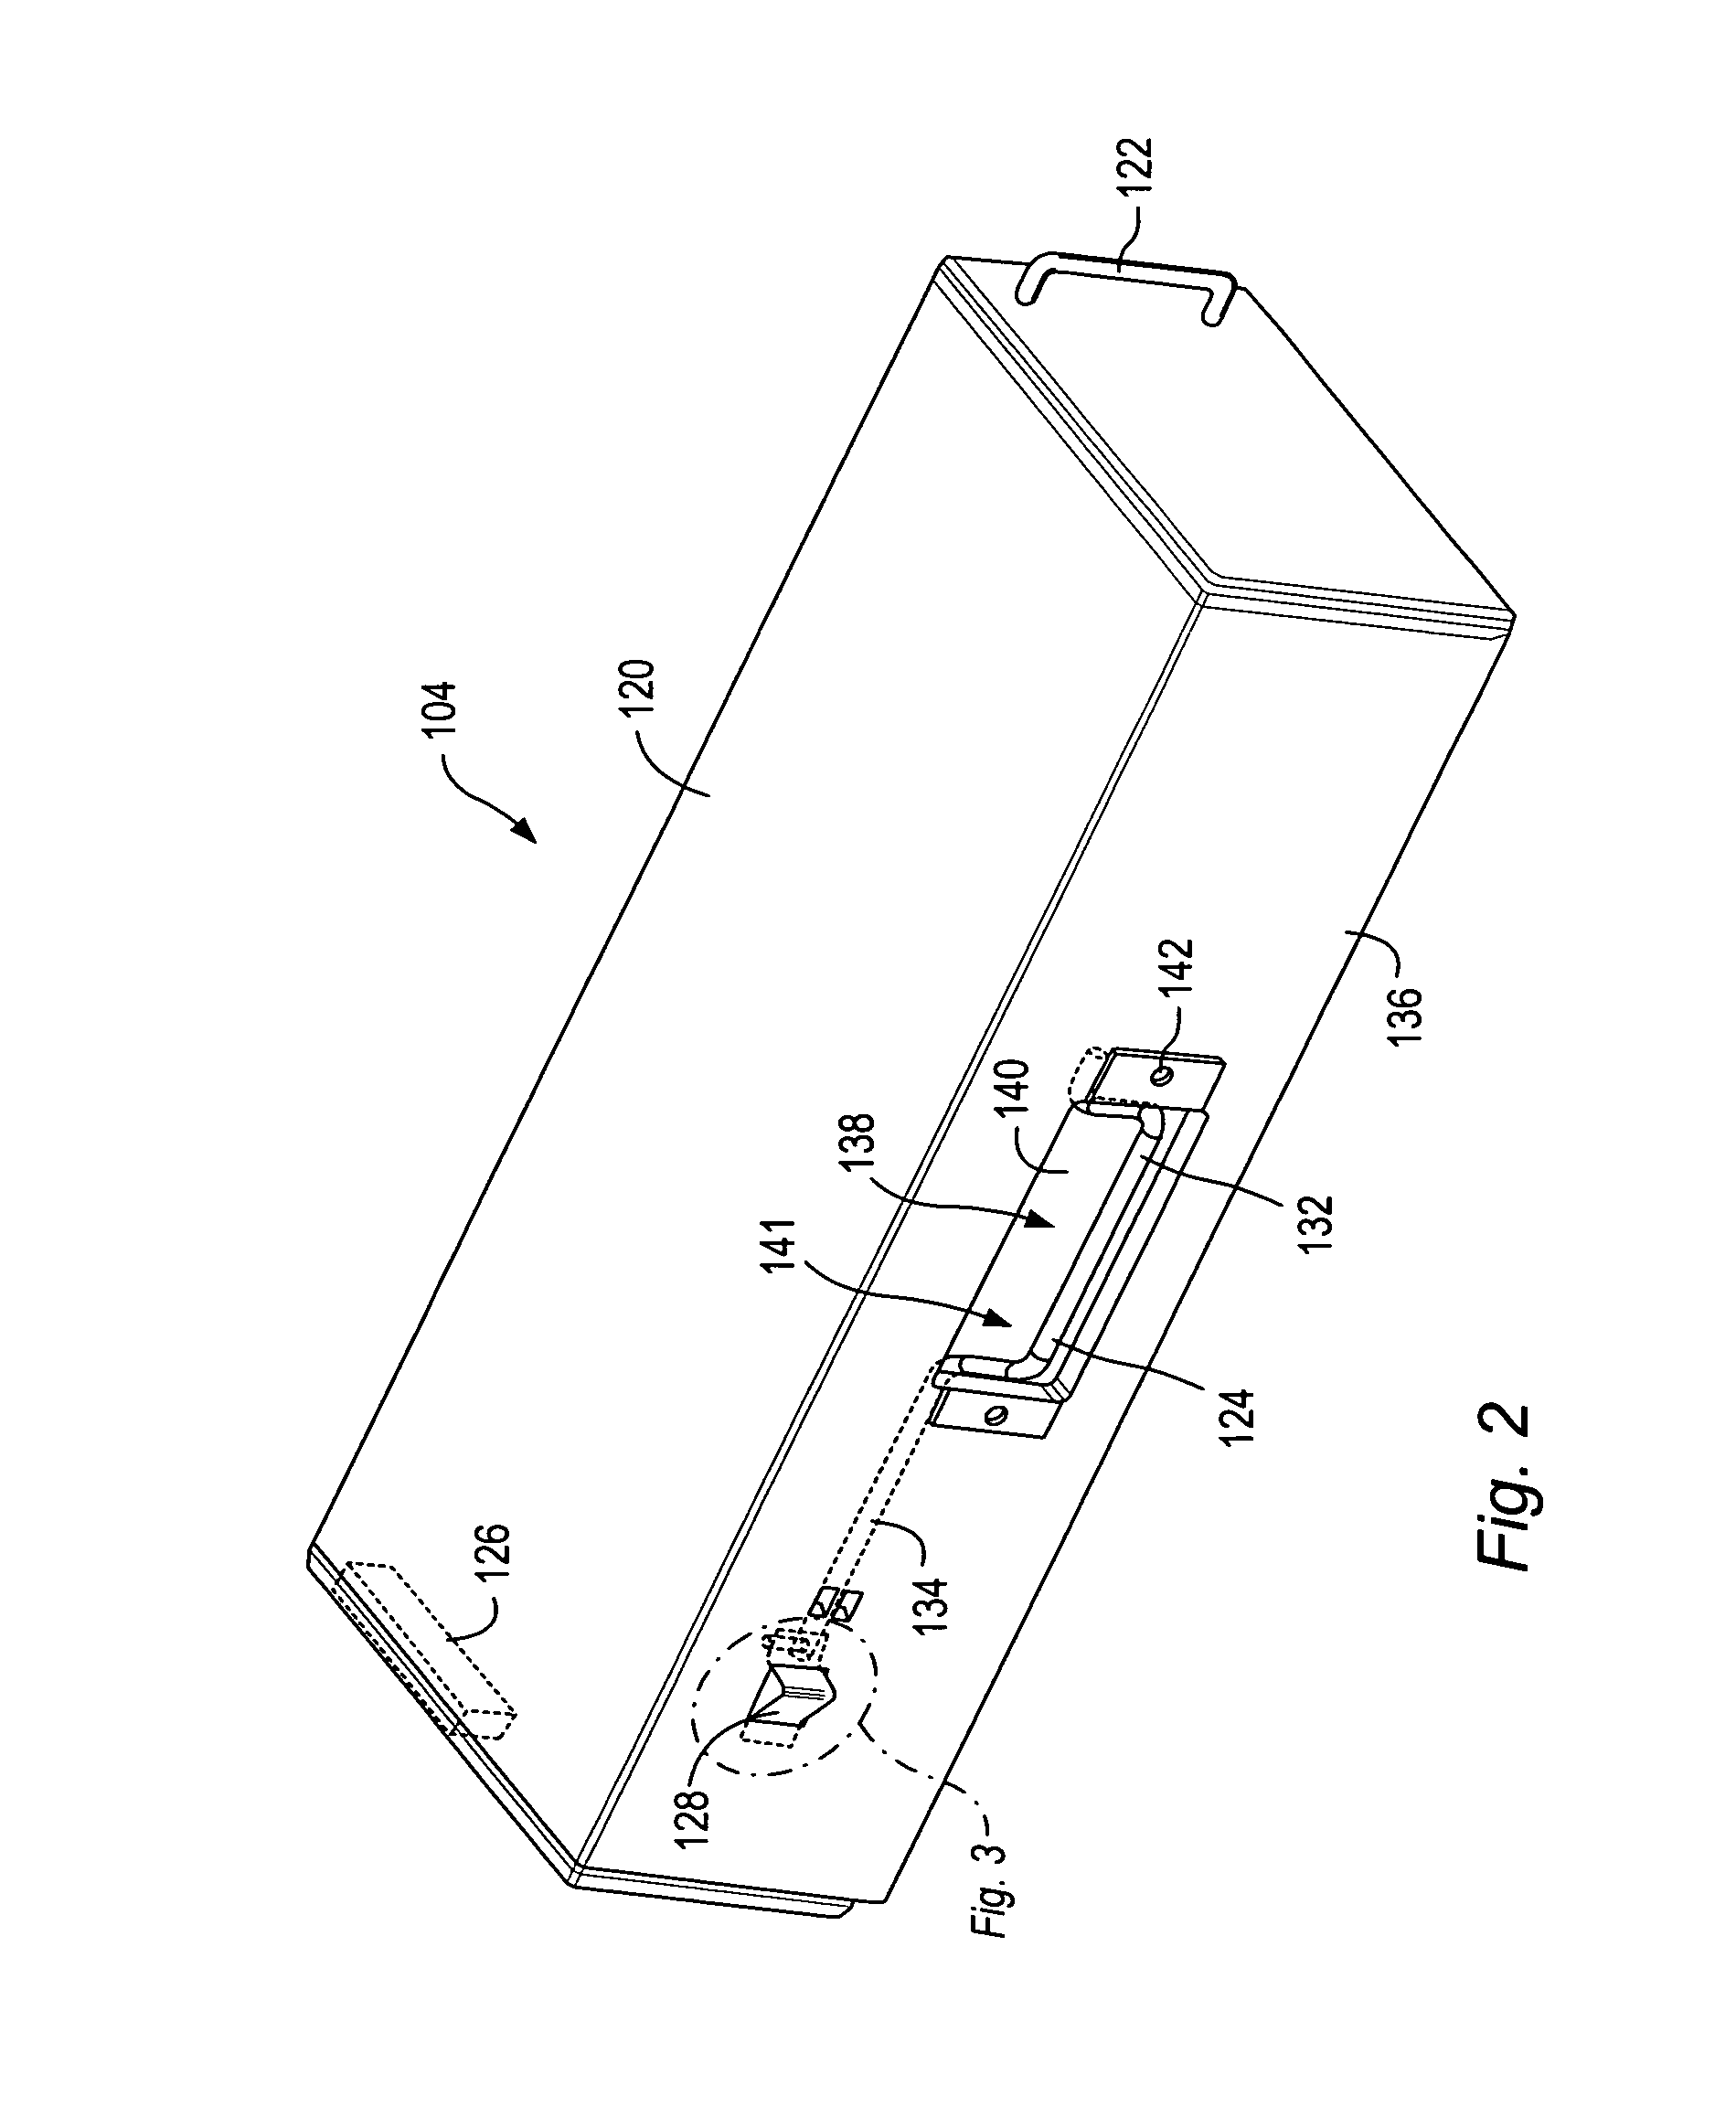 Component removal apparatus